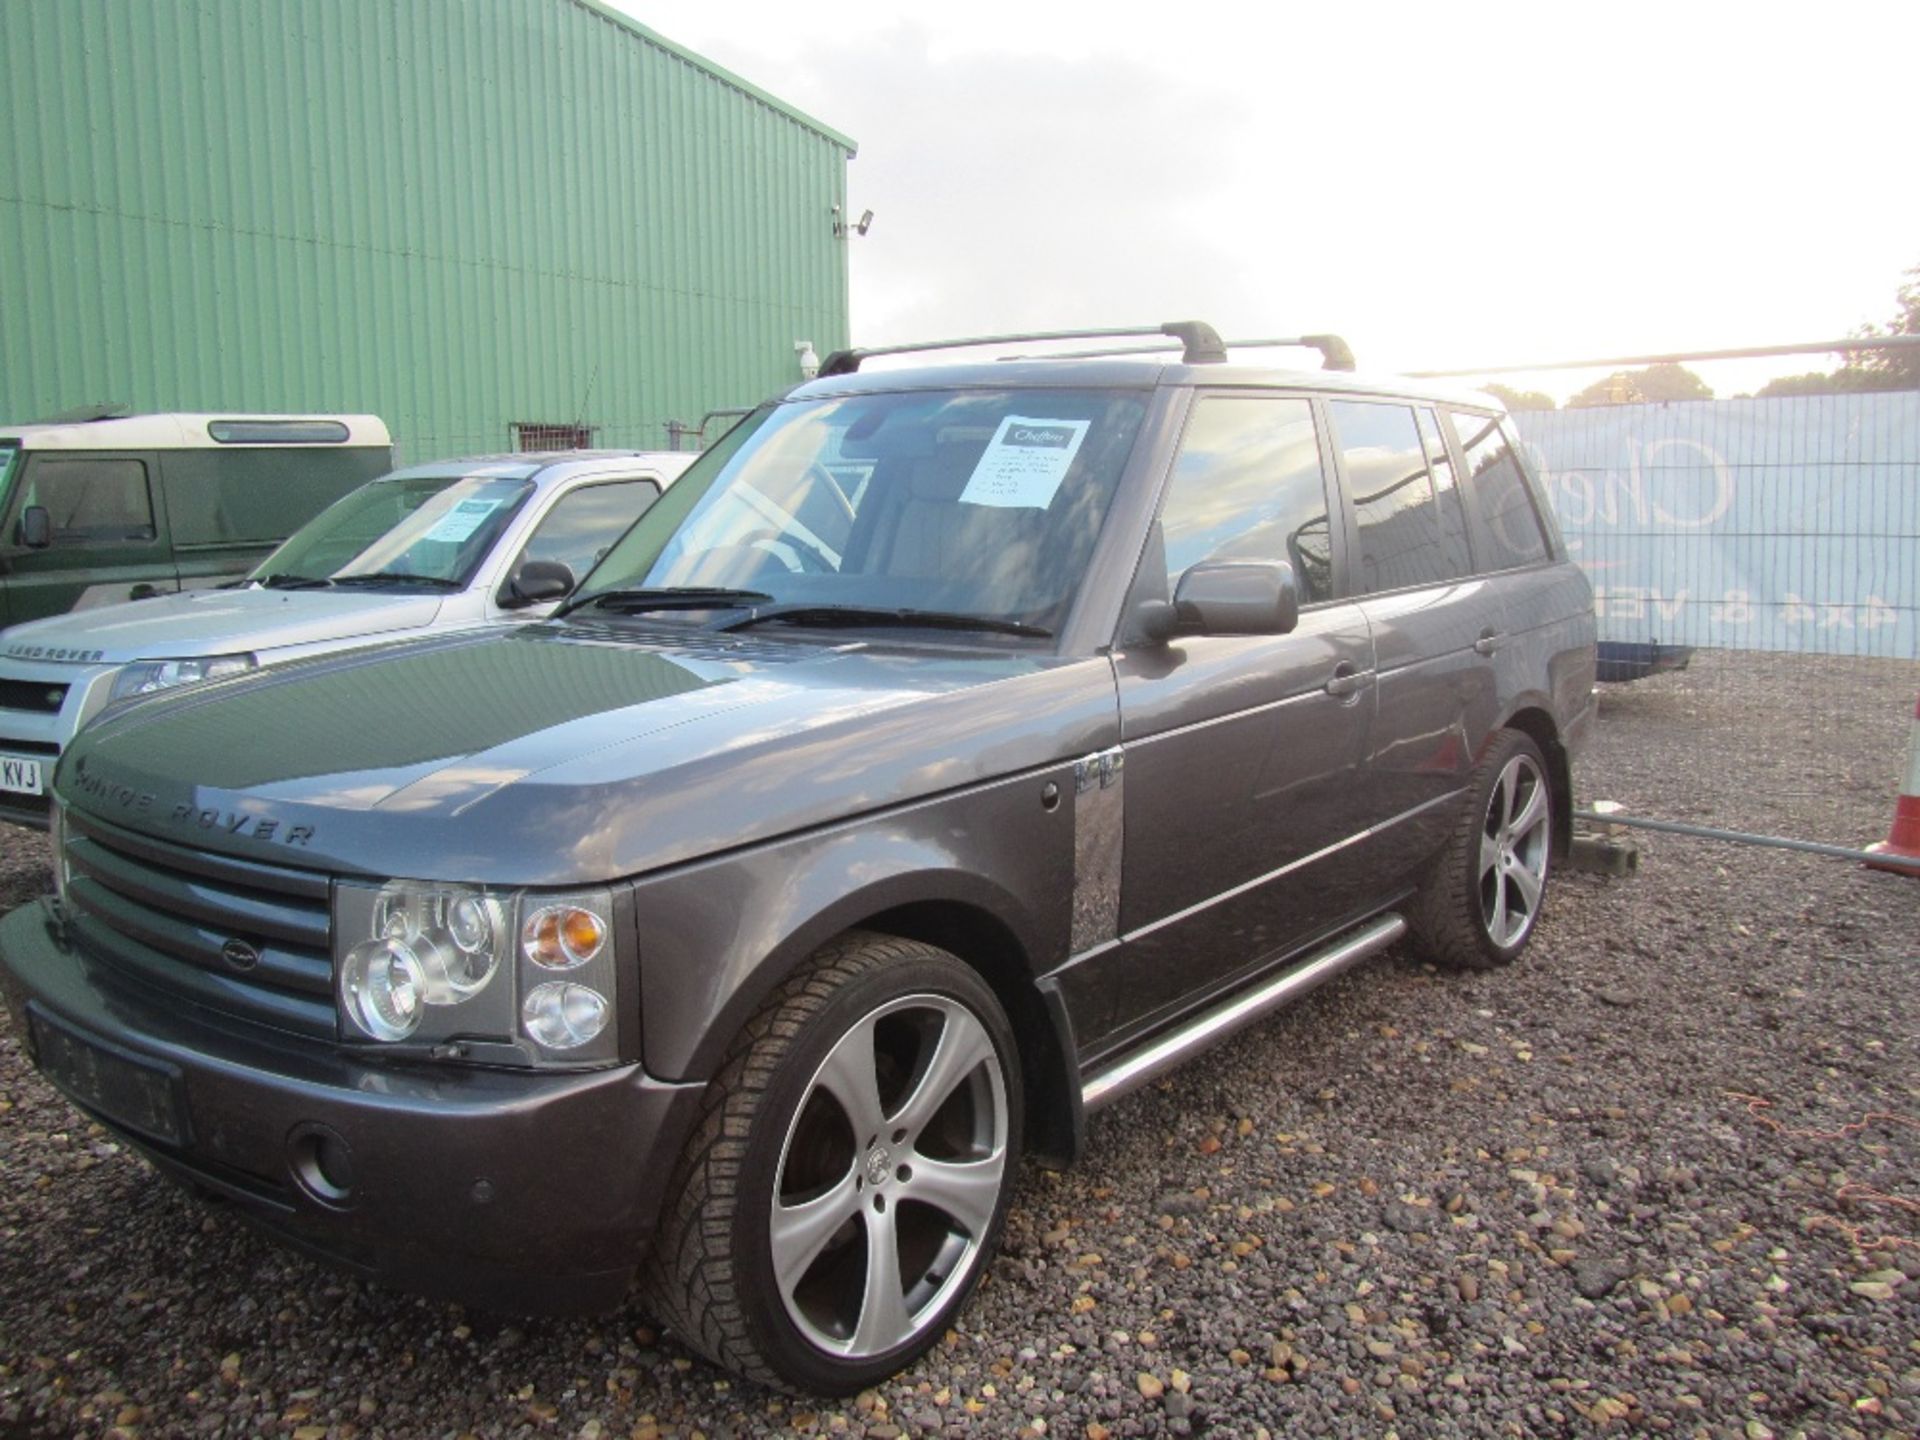 Range Rover Vogue TD6 Project Kahn Diesel 2926cc. No Registration Plates on as transferring from